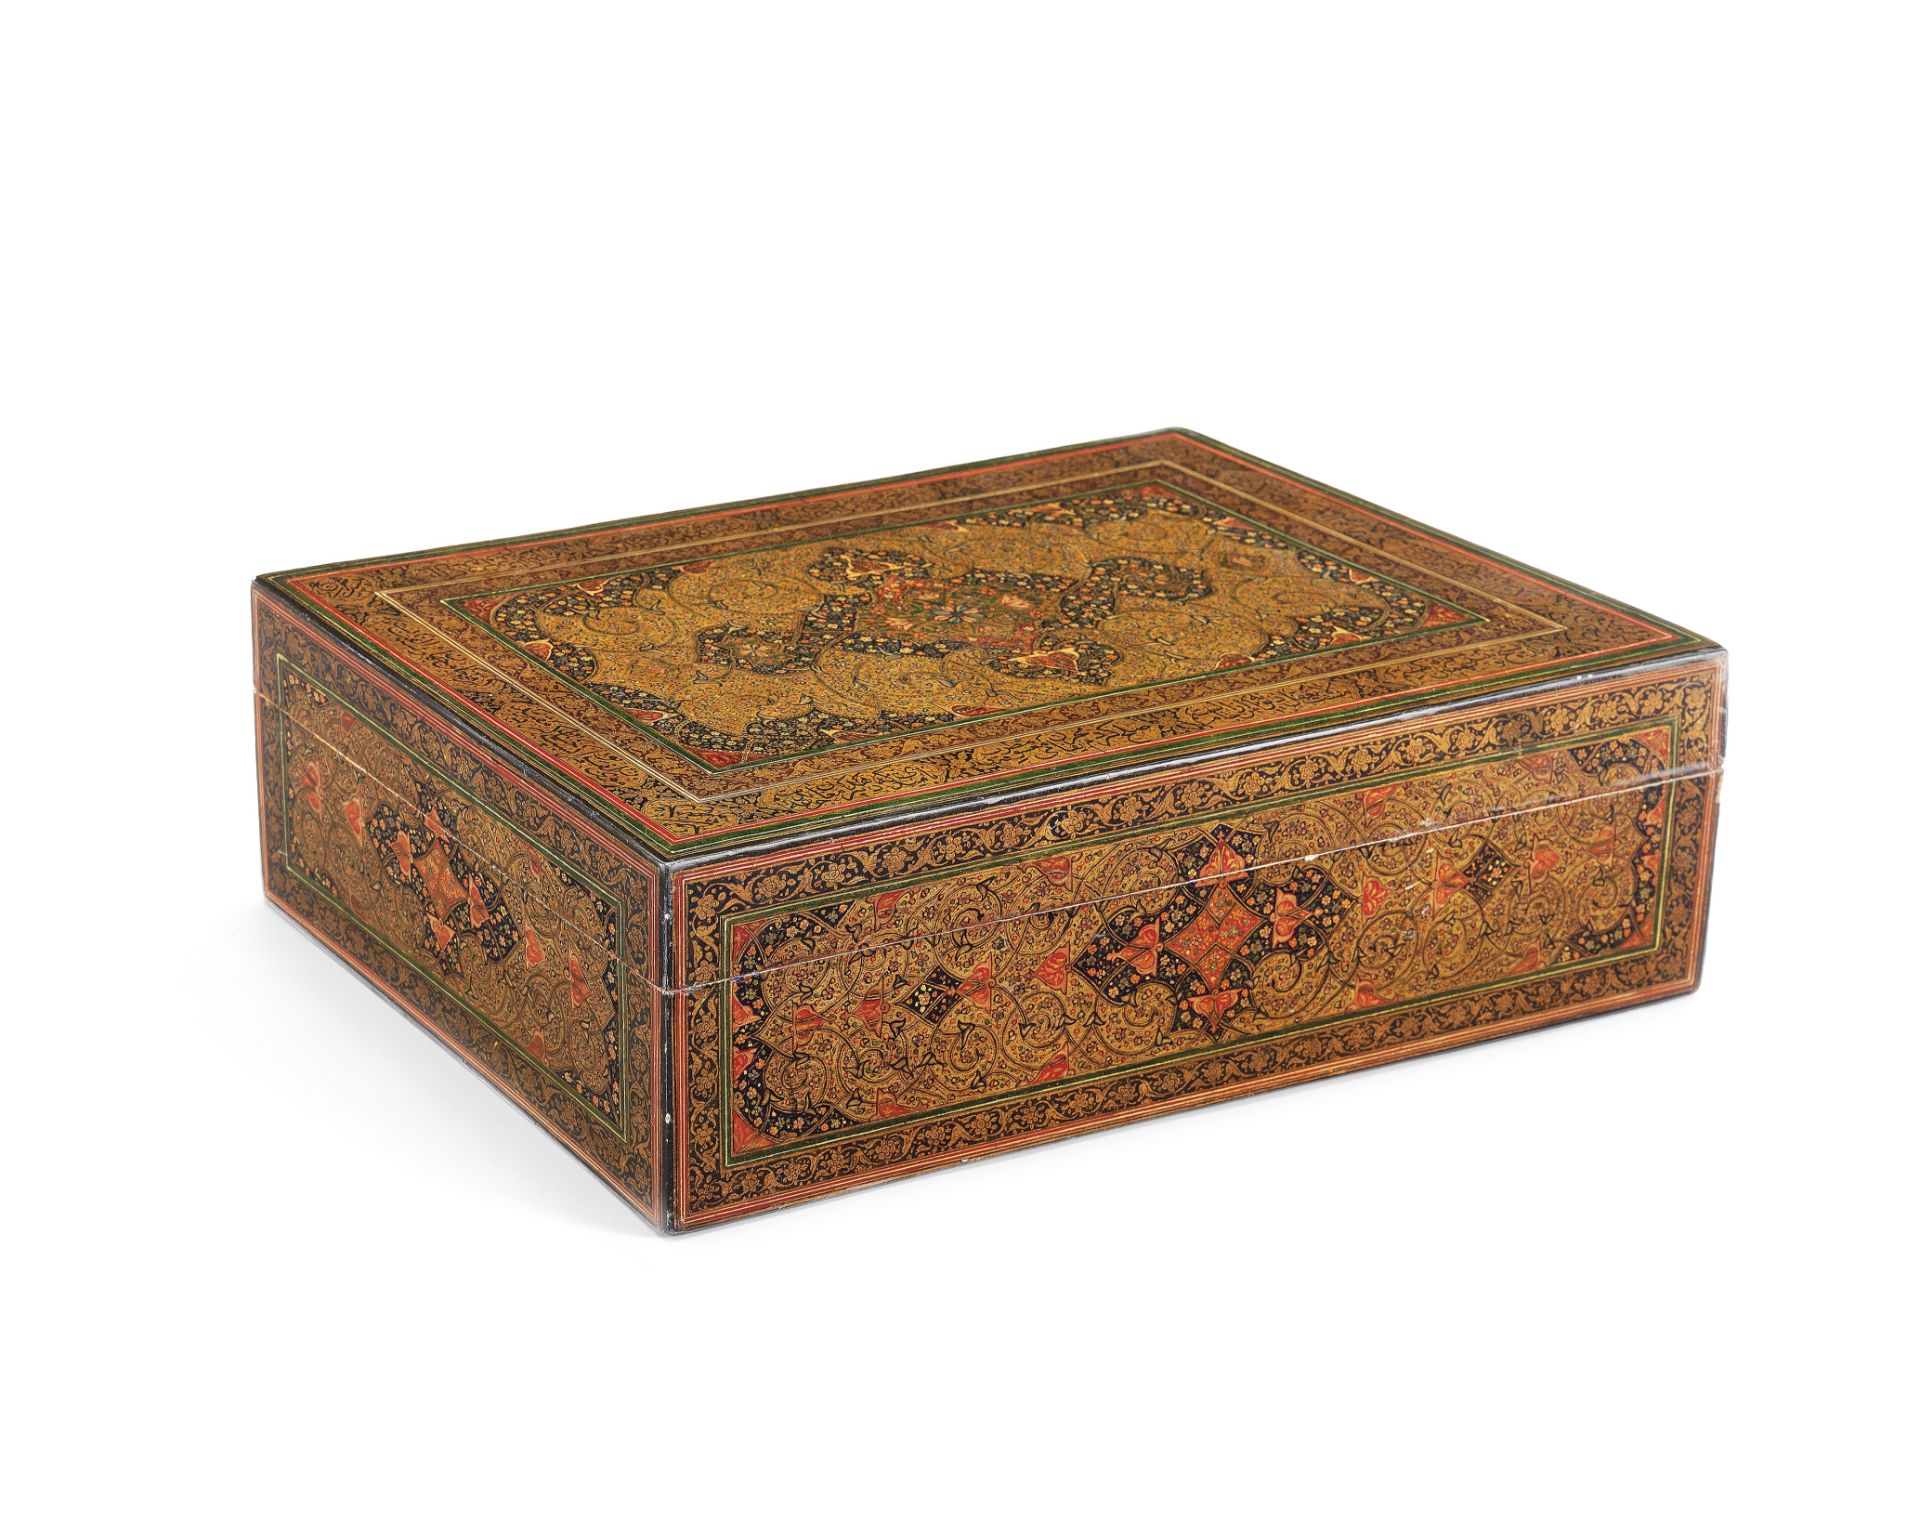 A Qajar lacquer box by Ma'sum 'Ali Persia, dated AH 1325/AD 1907